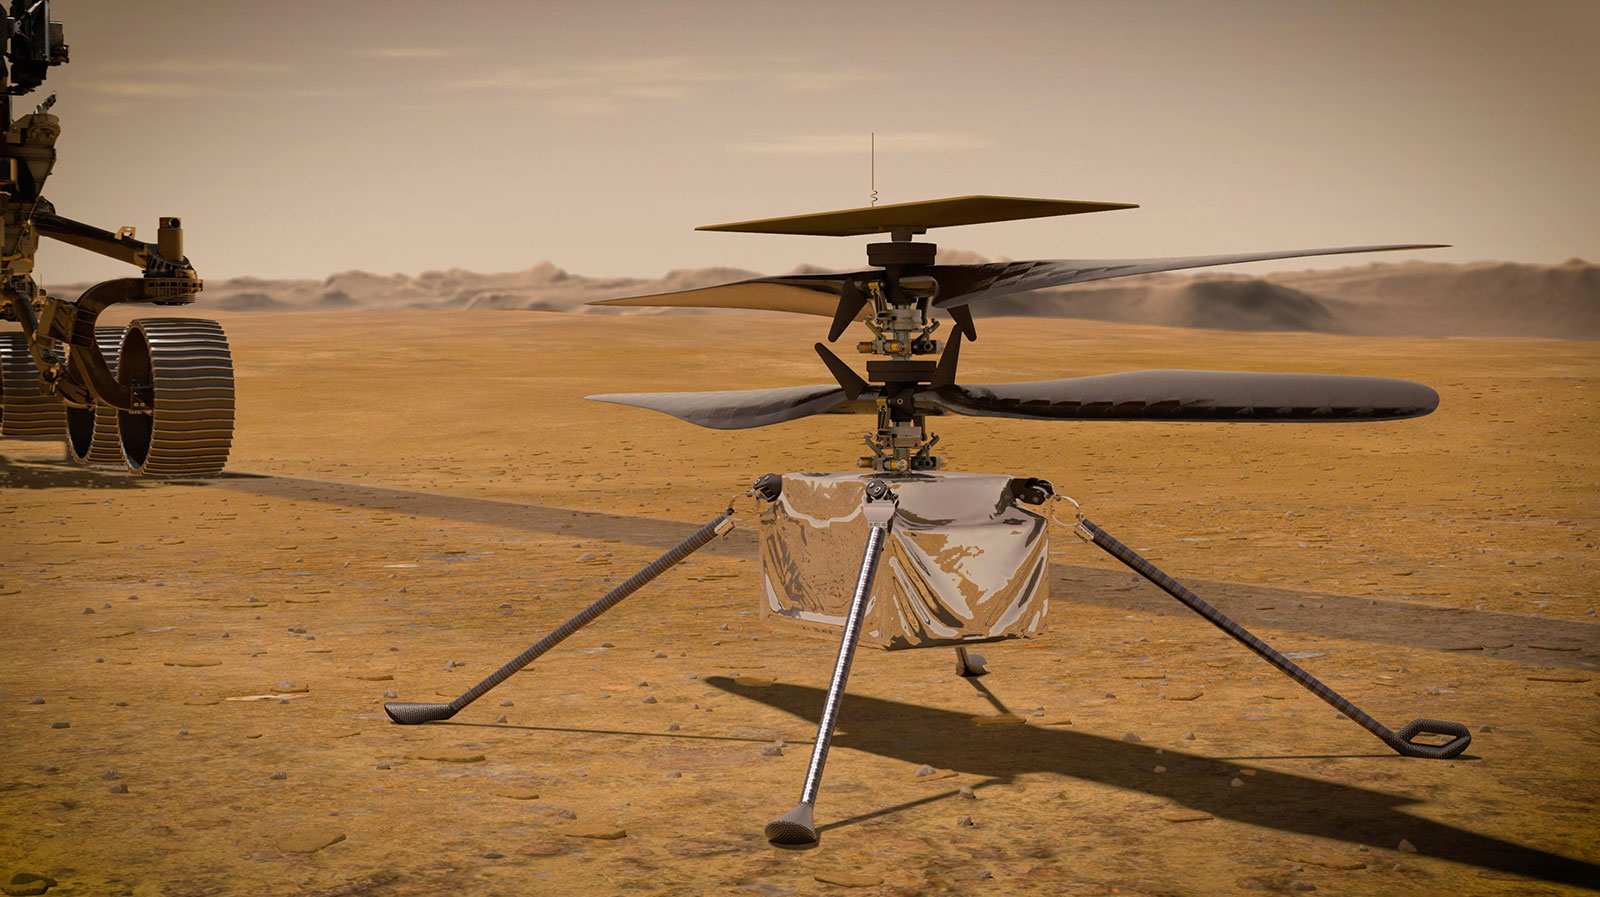 Mars through the “eyes” of a drone: NASA showed a video of the record flight Ingenuity